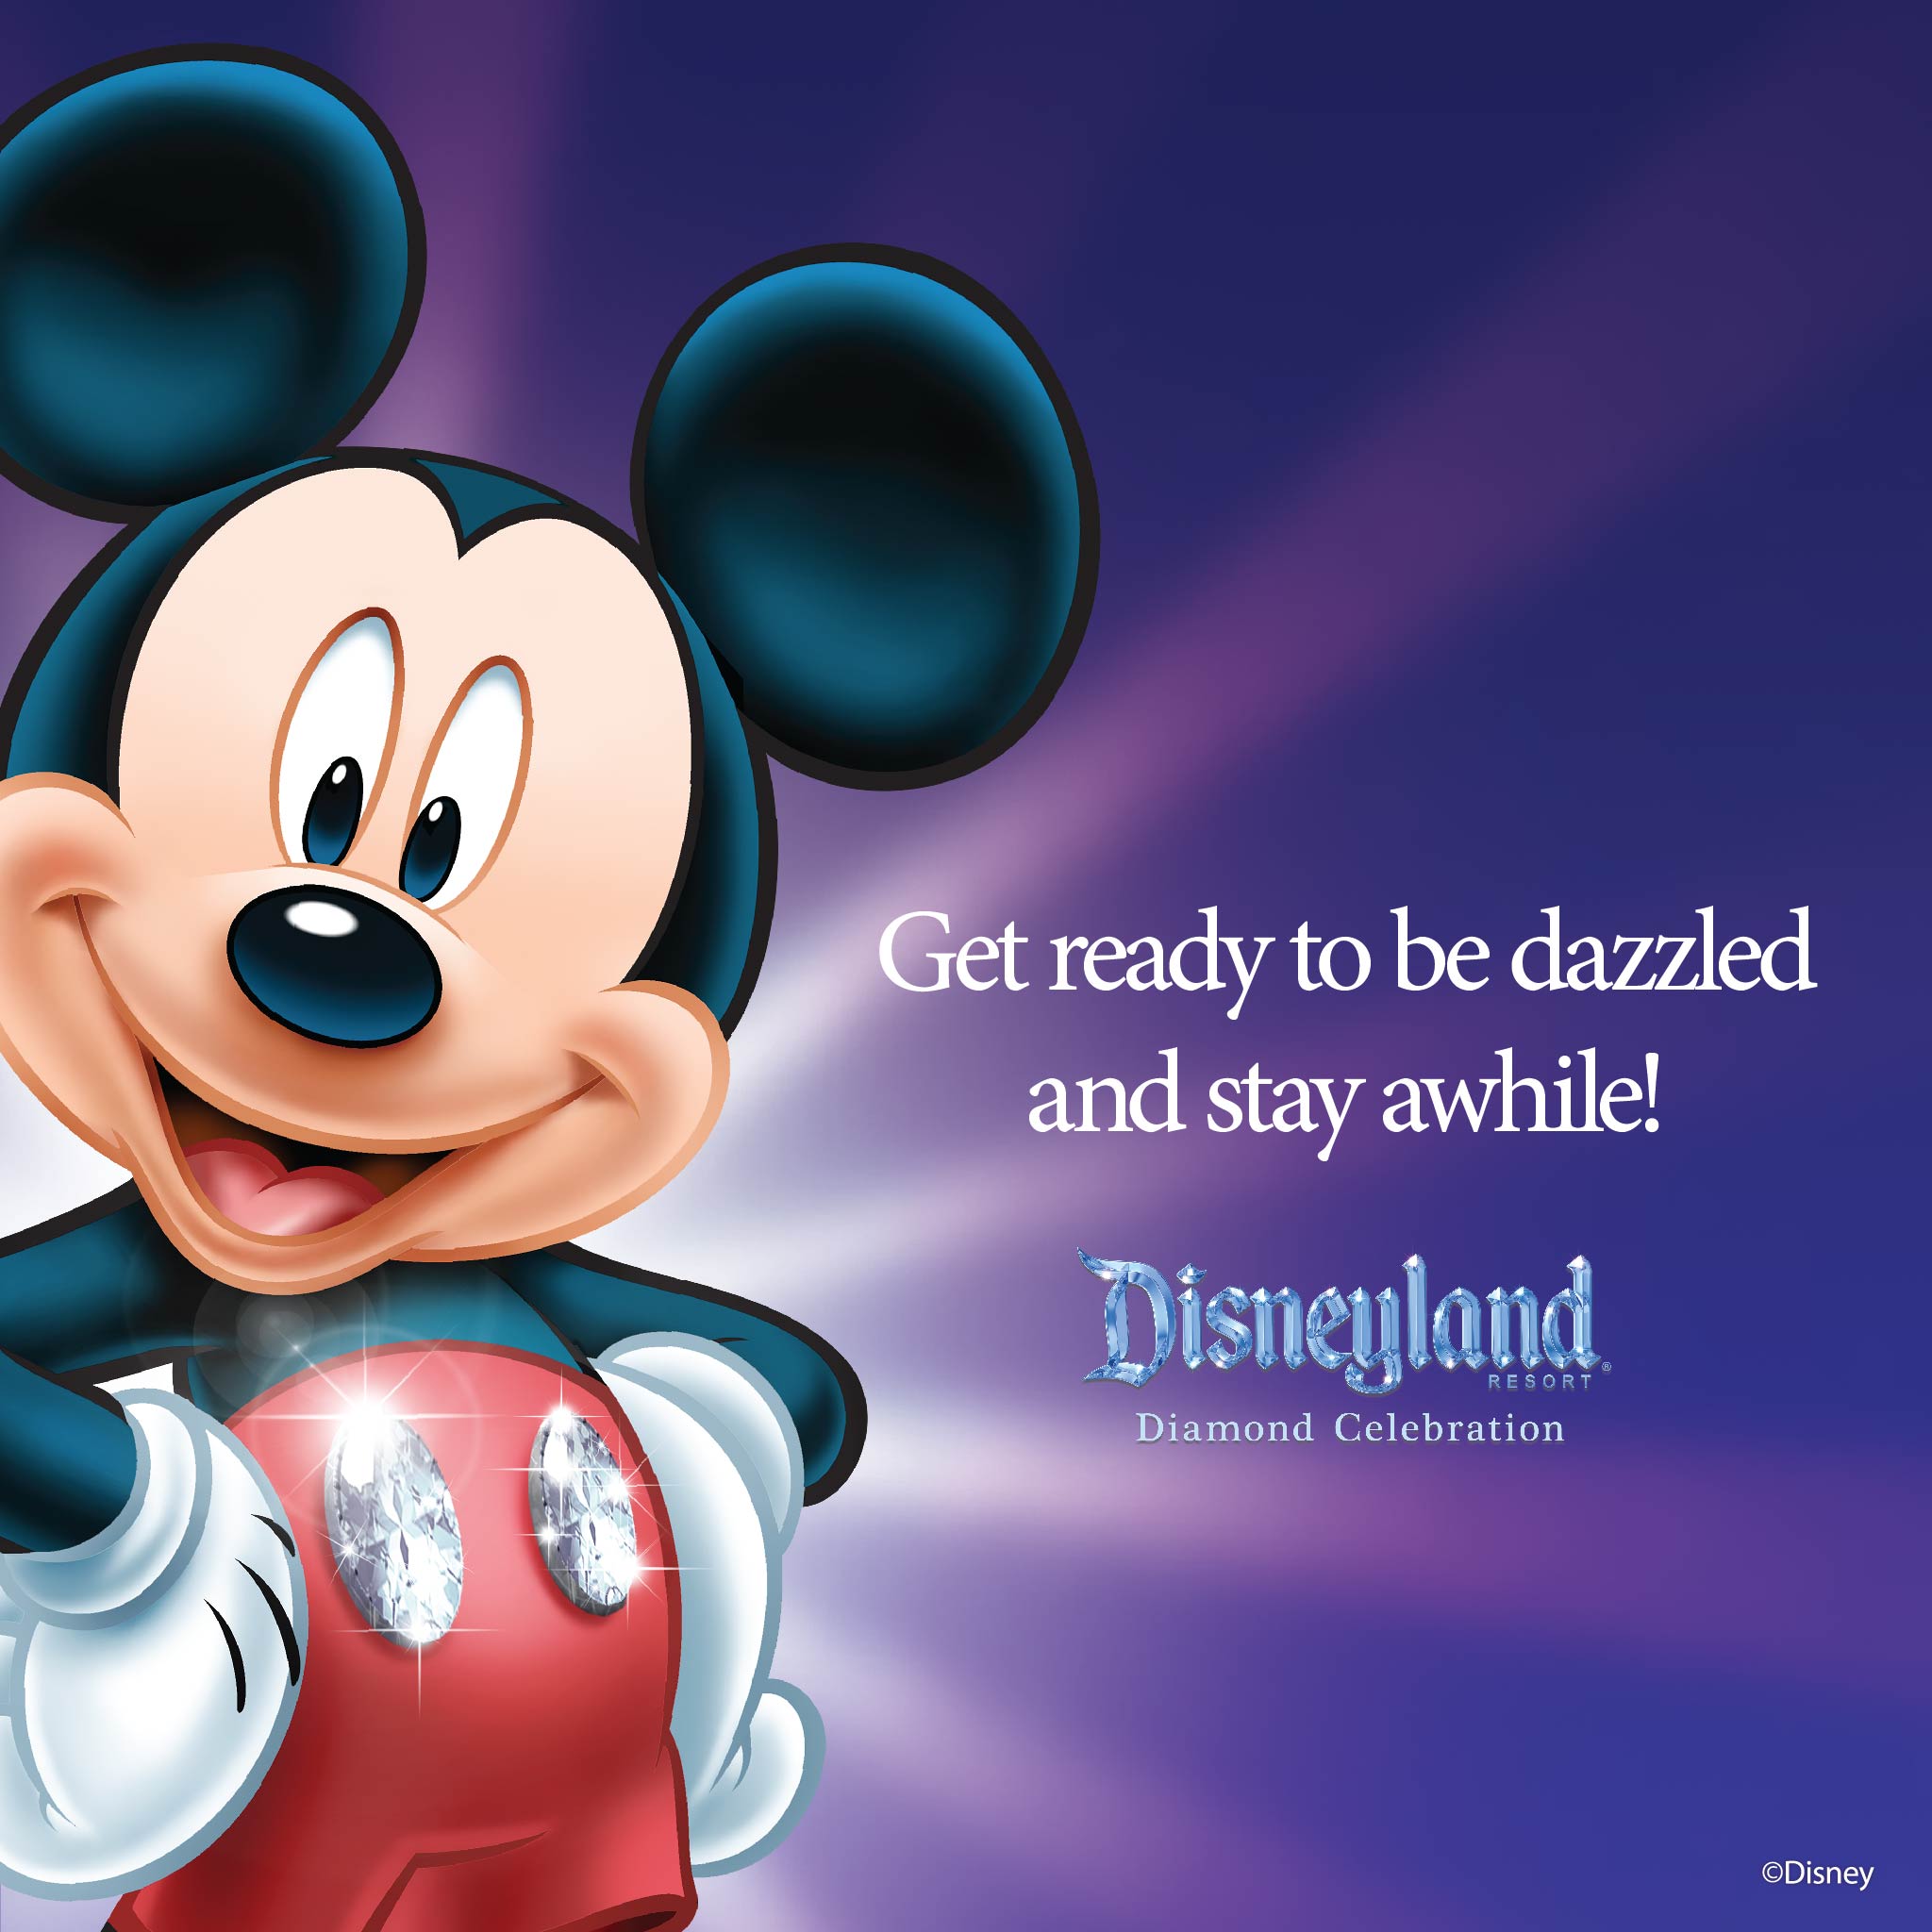 Save on Stays at the Disneyland Resort in Early 2016